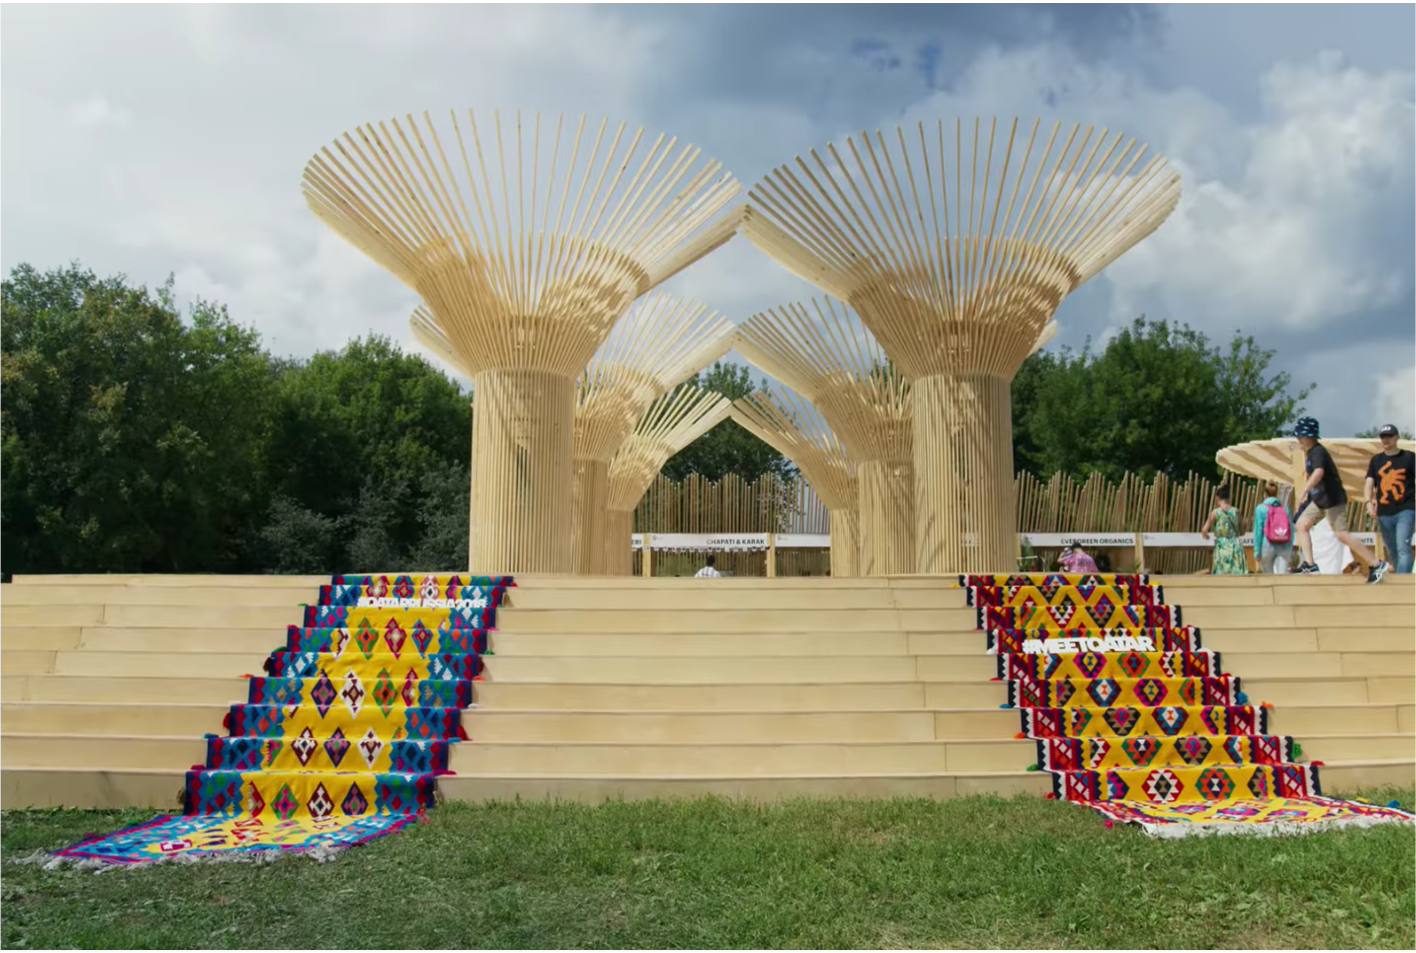 Two rows of wooden sculptures resembling trees at the top of a staircase at Afisha Picnic in Russia.